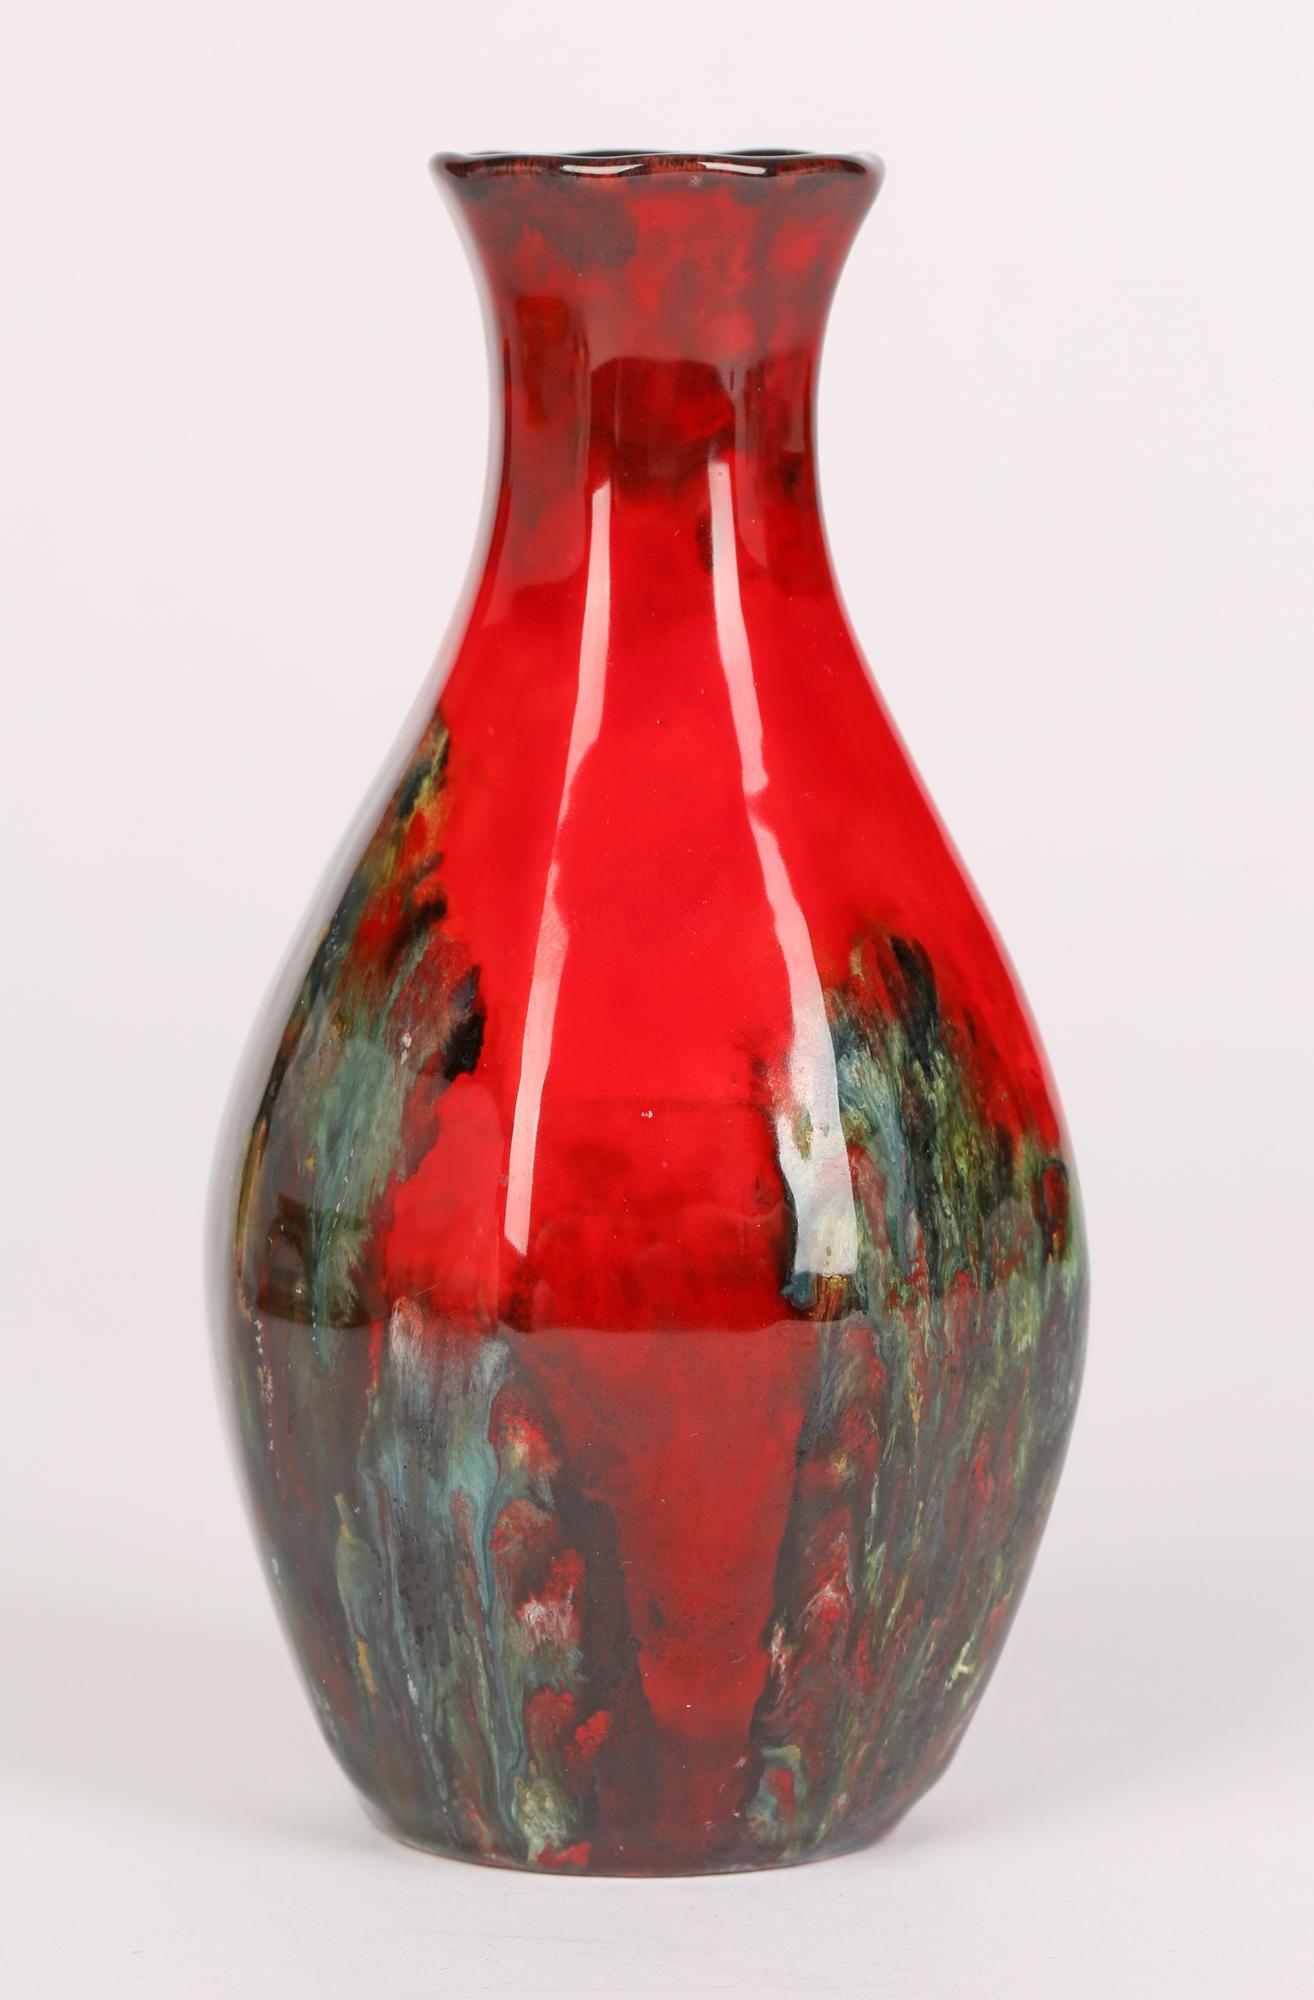 A Royal Doulton Sung Ware art pottery vase decorated with abstract designs on a flambe glazed red ground designed by Charles Noke and Fred Moore dating from around 1920. The hexagonal shaped vase is marked to the base with artist signatures.

In